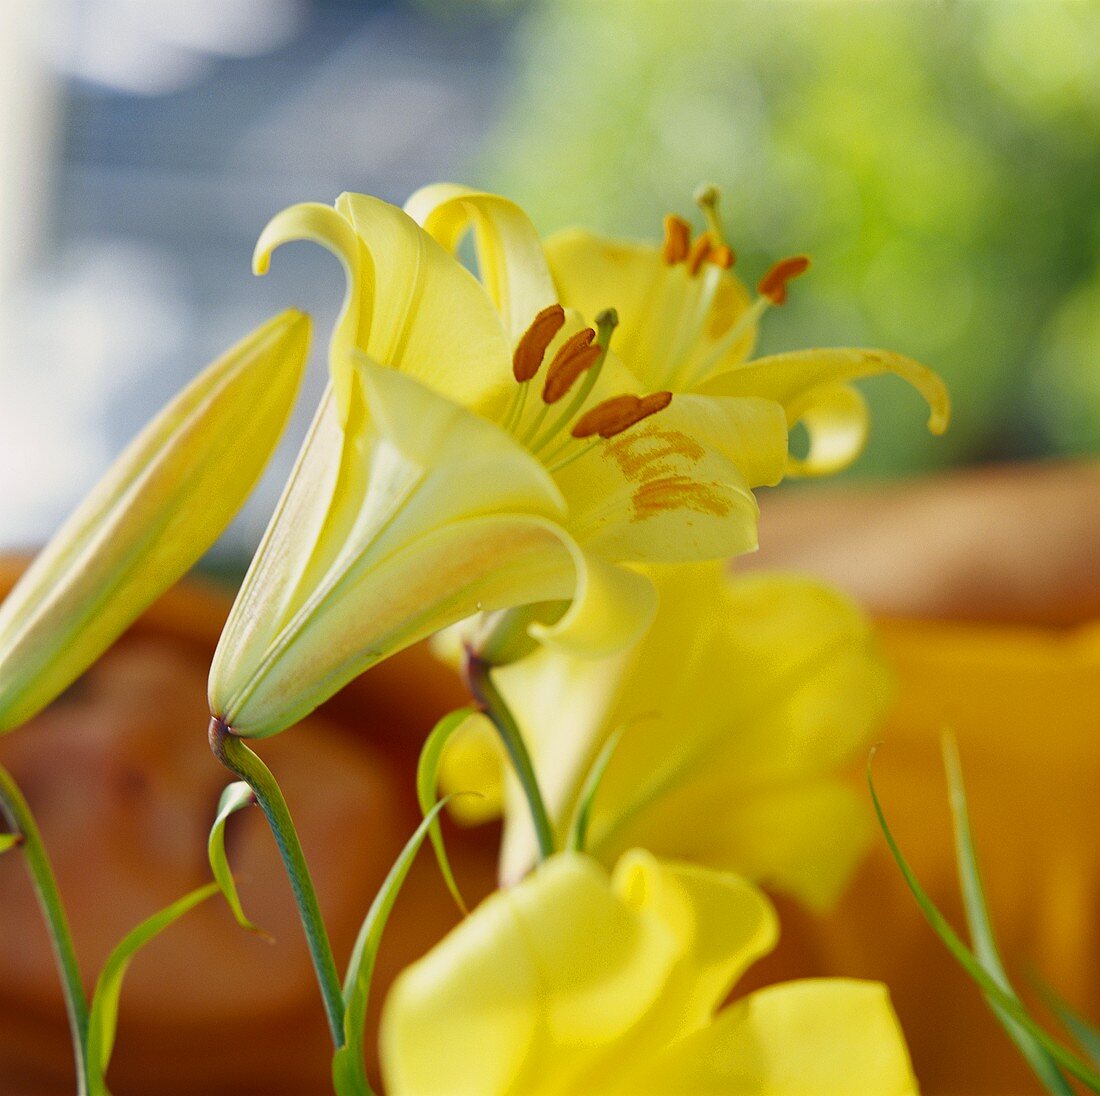 Yellow lilies in close-up